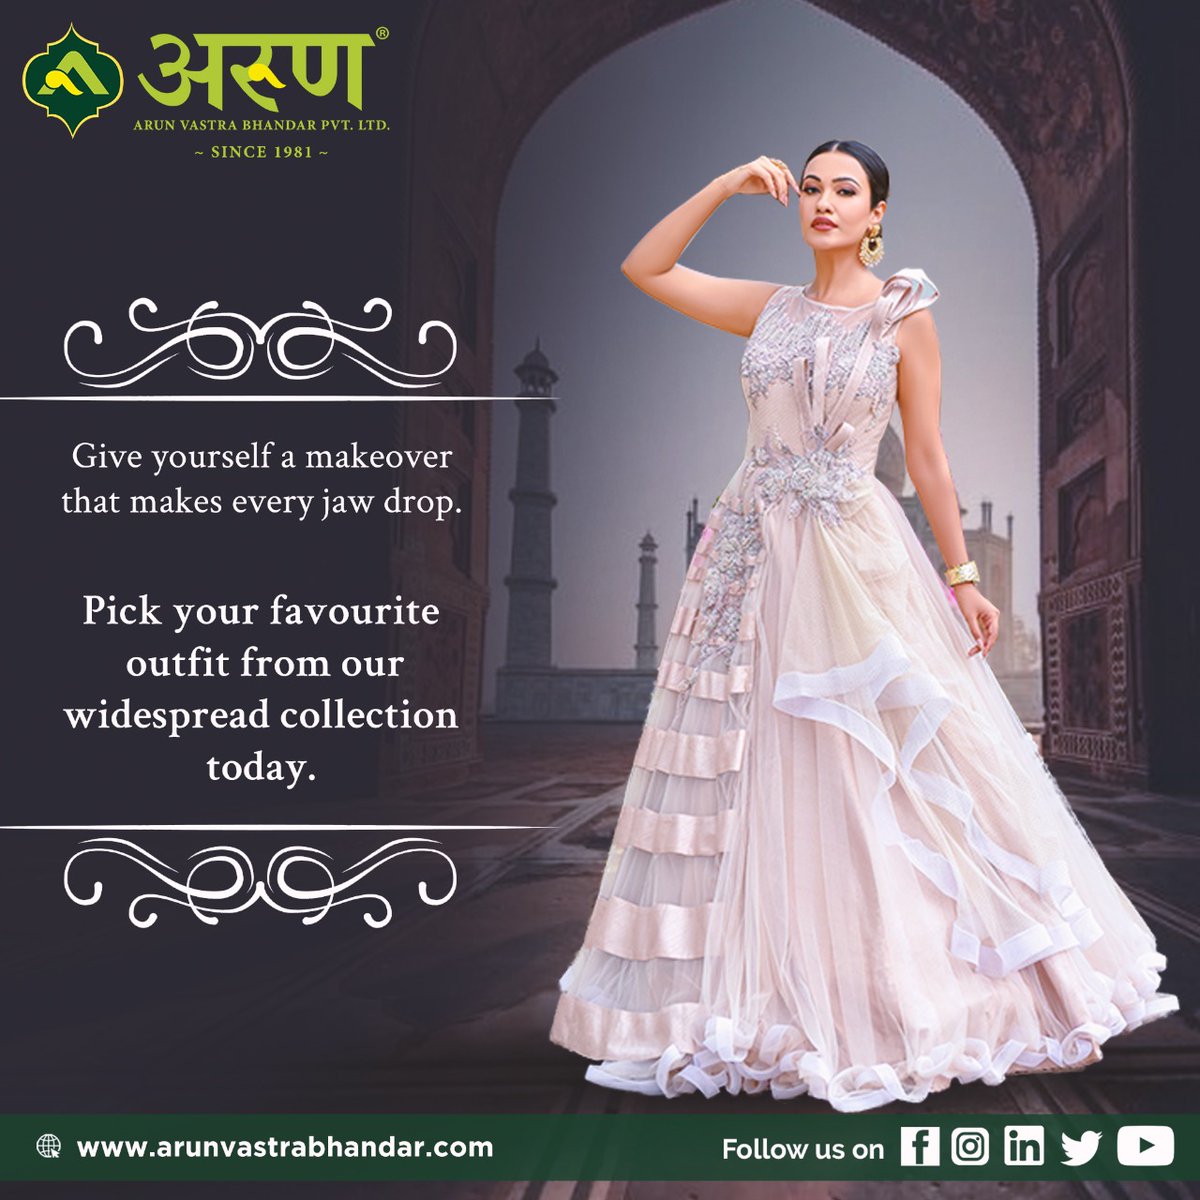 Arun Vastra Bhandar Pvt. Ltd. - Buy beautiful gowns that capture the beauty  of your look, Book your online appointment for shopping Contact us at:  +91-9319692302, 03 #Arunvastrabhandar #Newcollection #Ethnicwears #Fashion  #Elegance #